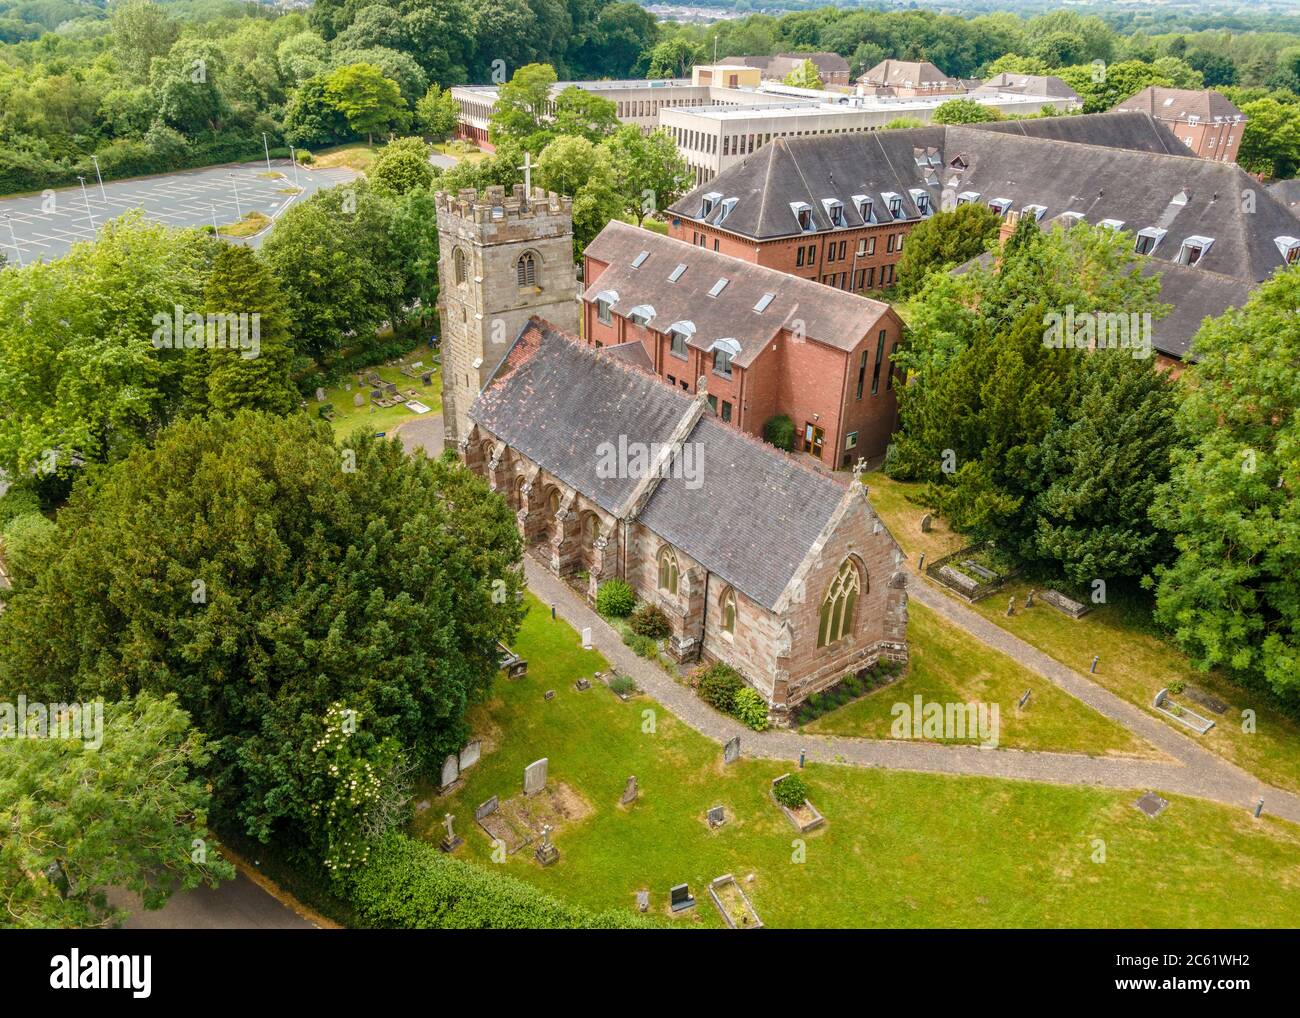 Aerial view of St. Peters Church, Ipsley, Redditch, Worcestershire, England. Stock Photo